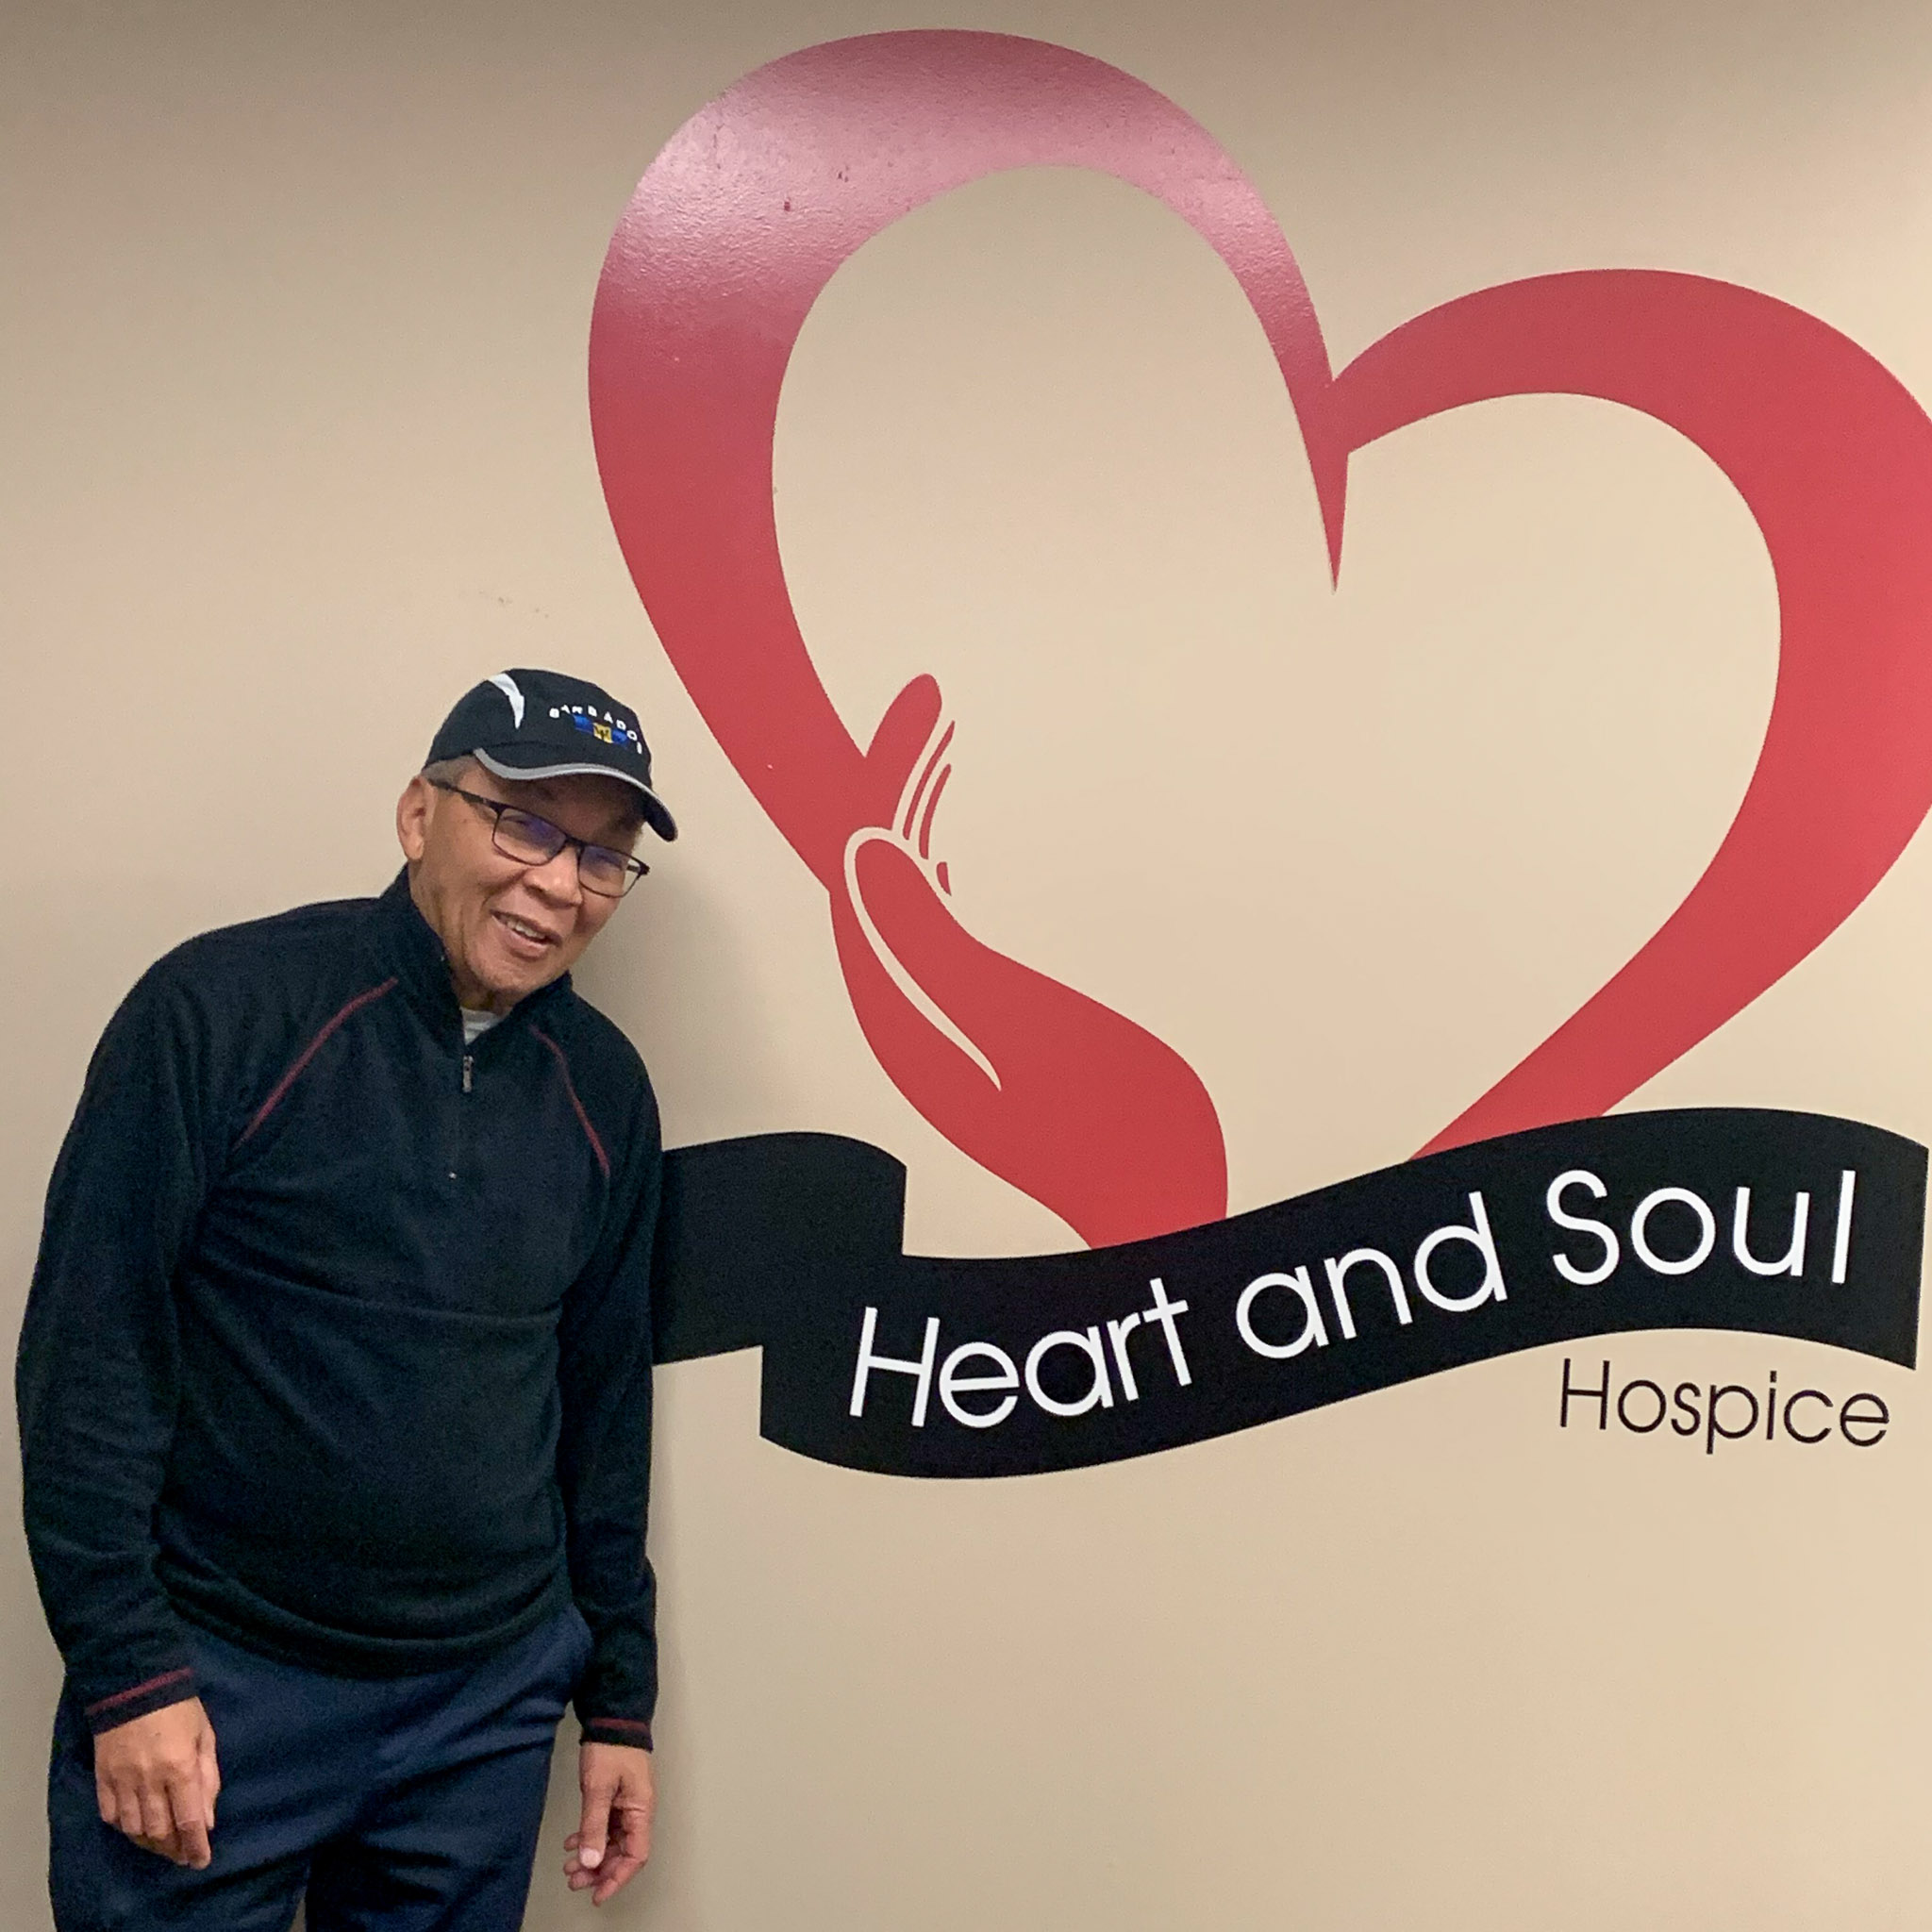 Andre Lee in hat, standing next to logo of Heart and Soul Hospice